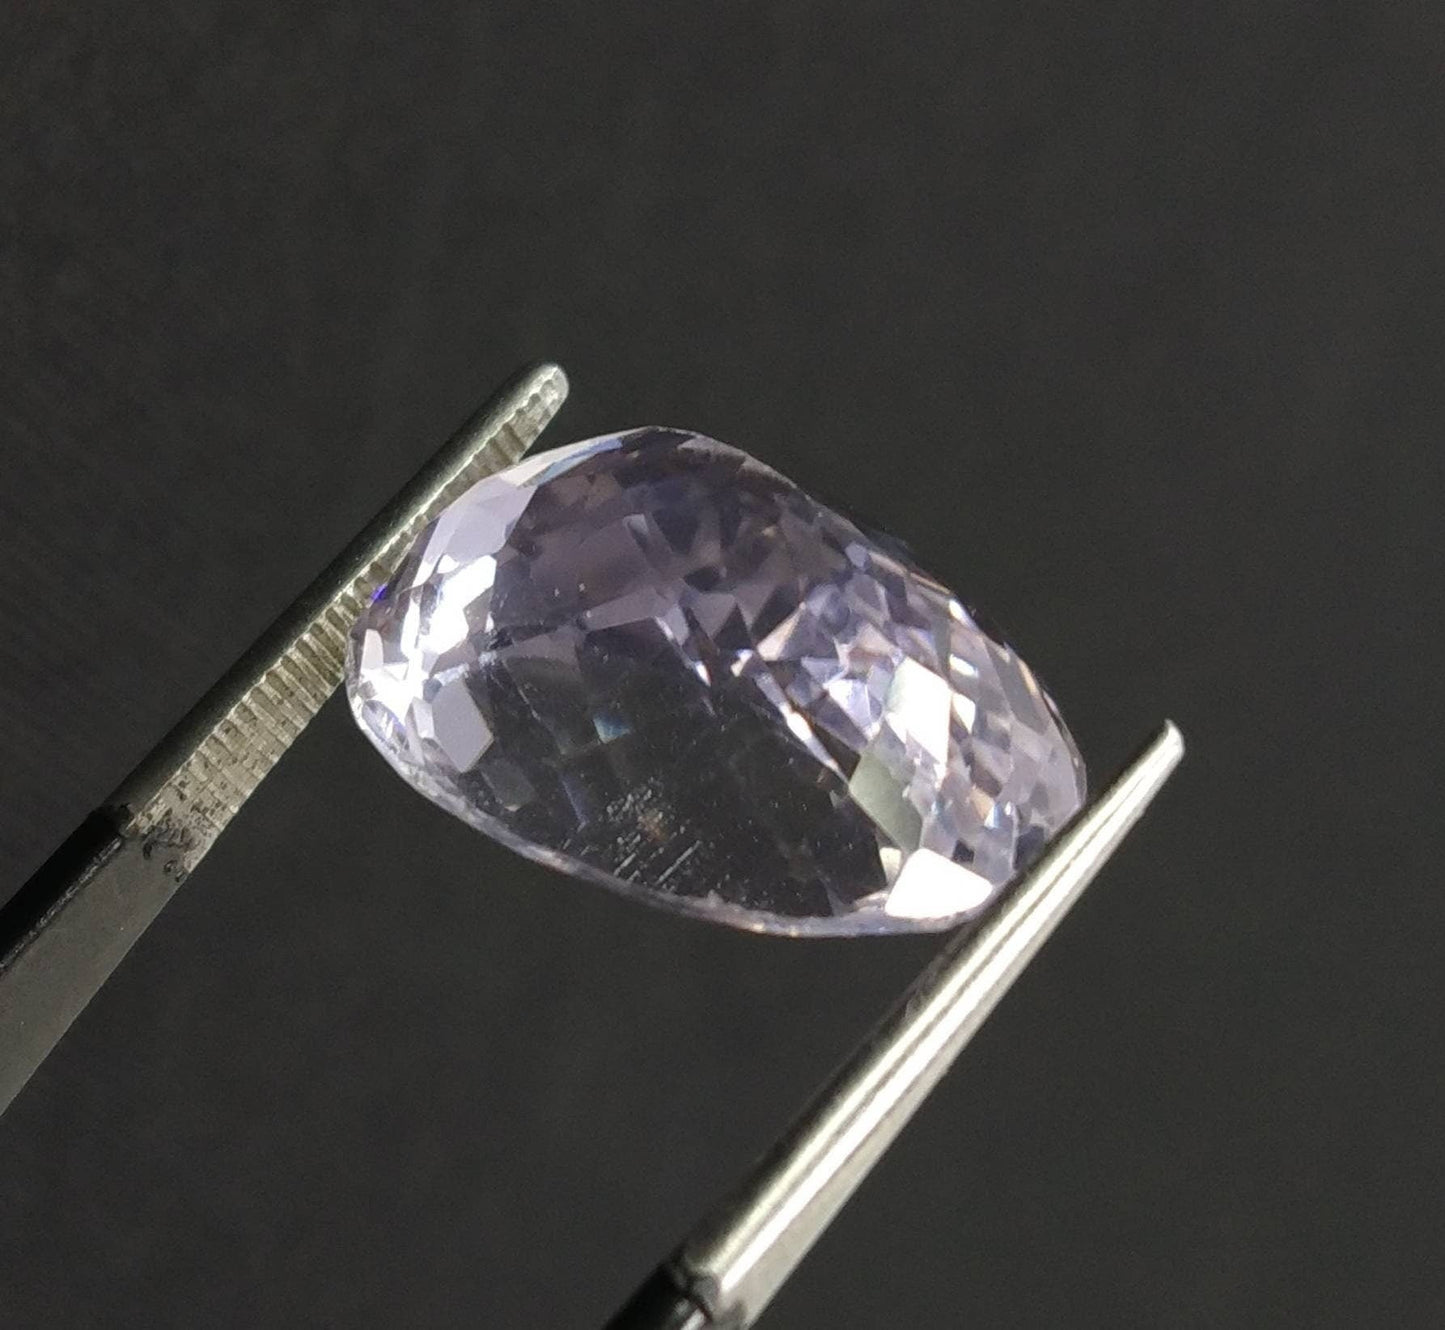 ARSAA GEMS AND MINERALSNatural fine quality beautiful 16 carats oval shape faceted kunzite gem - Premium  from ARSAA GEMS AND MINERALS - Just $32.00! Shop now at ARSAA GEMS AND MINERALS